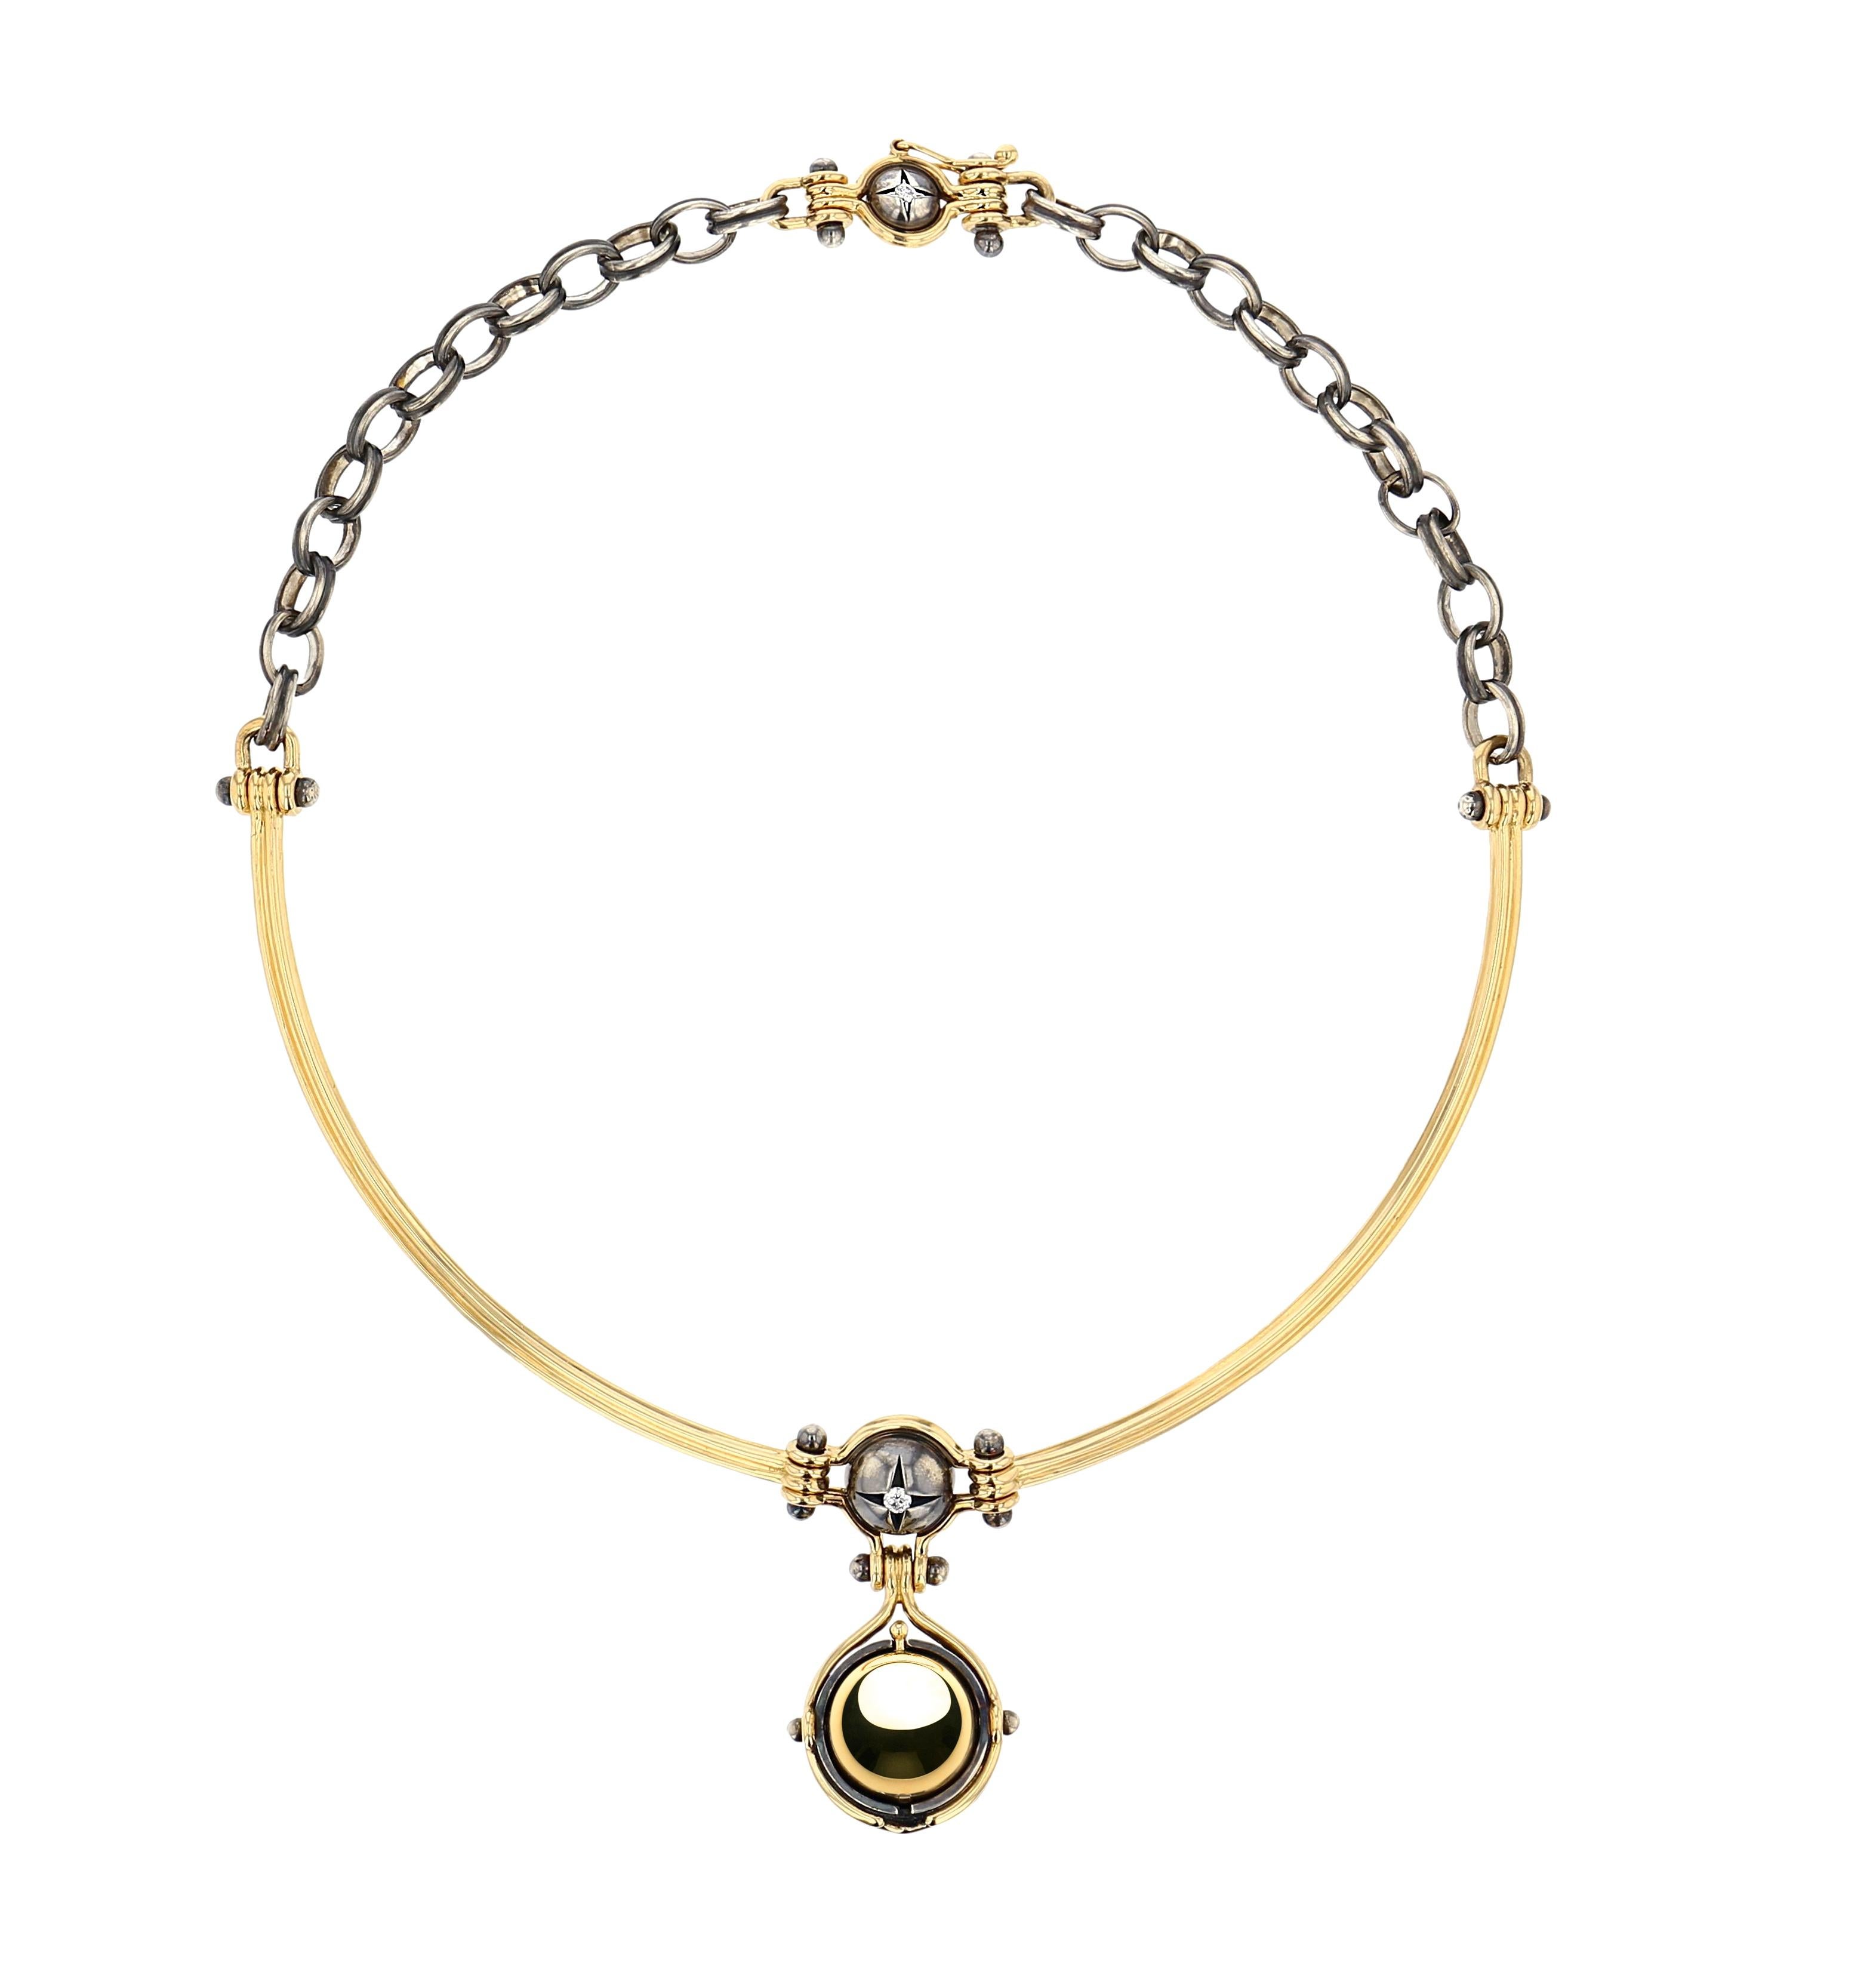 Yellow gold and distressed silver necklace. Rotating sphere revealing an akoya pearl, set with a diamond and encircled by a white gold ring set with a diamond.  

Yellow gold wire and distressed silver chain.

Details:
Akoya Pearl 
Diamonds
18k